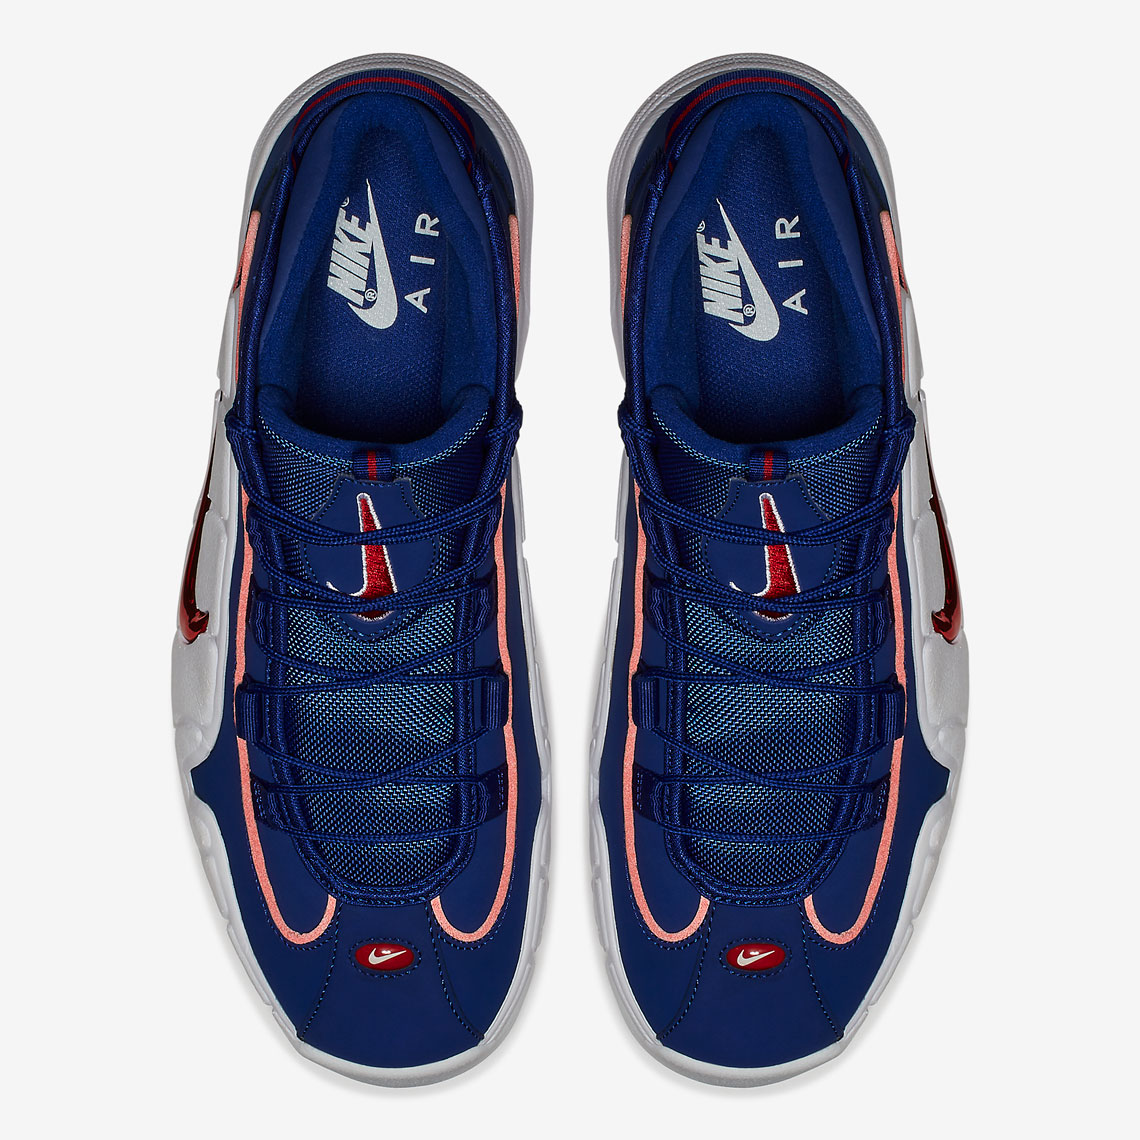 Nike Air Max Penny 1 Lil Penny Release Info